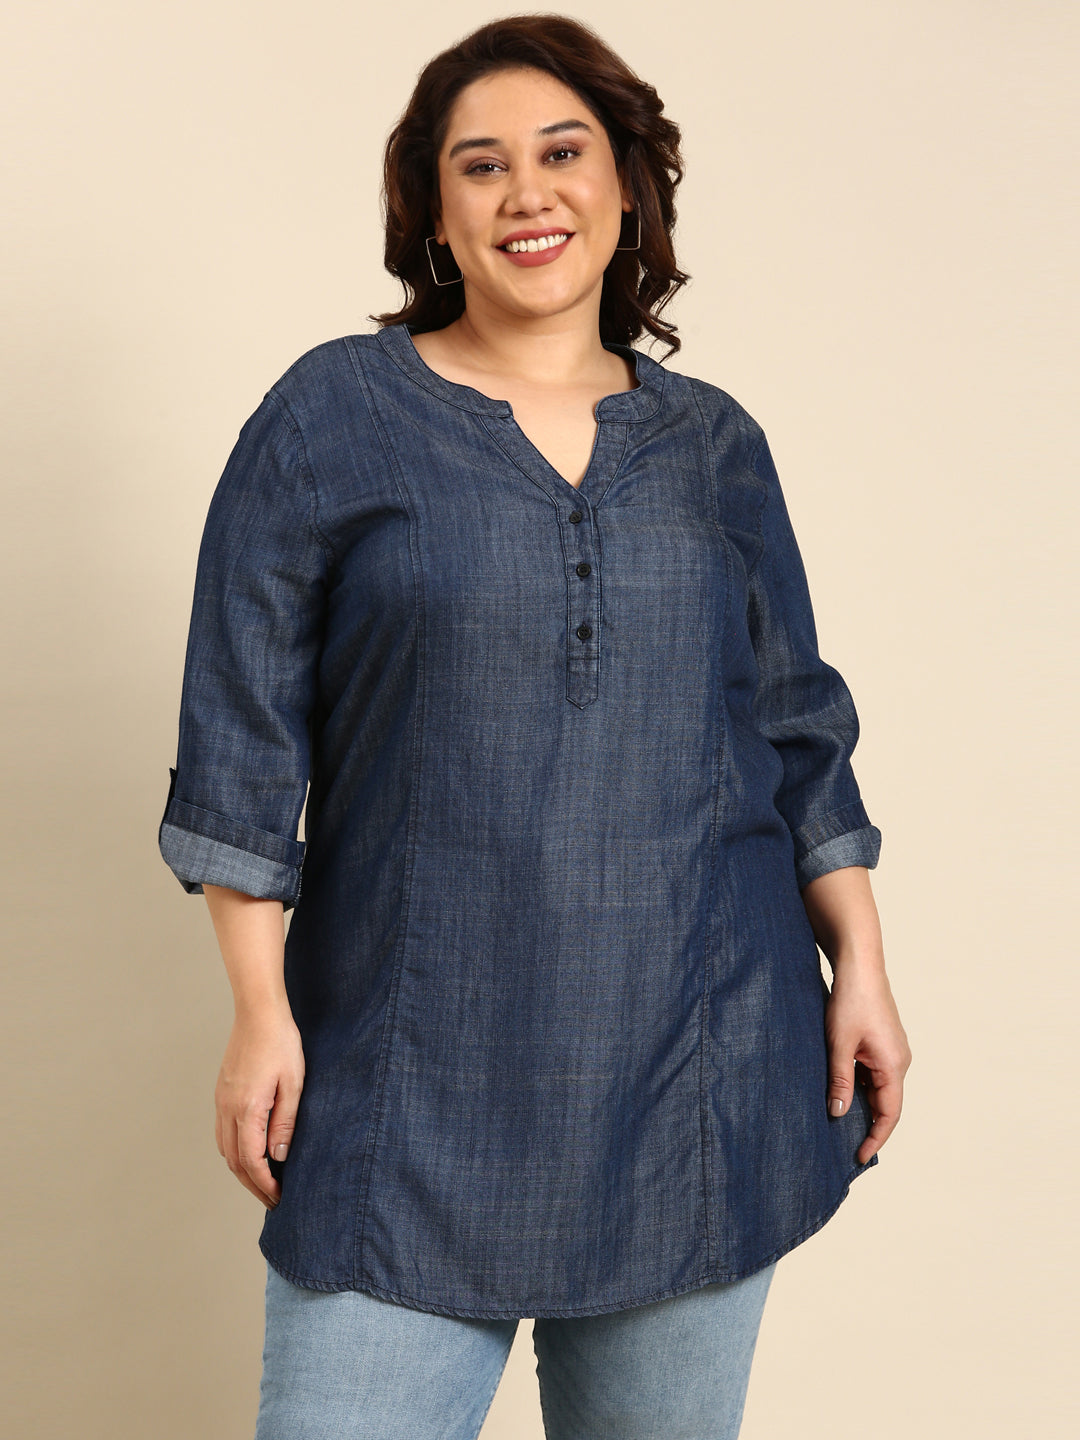 A wide variety of plus size tops for women on offer here